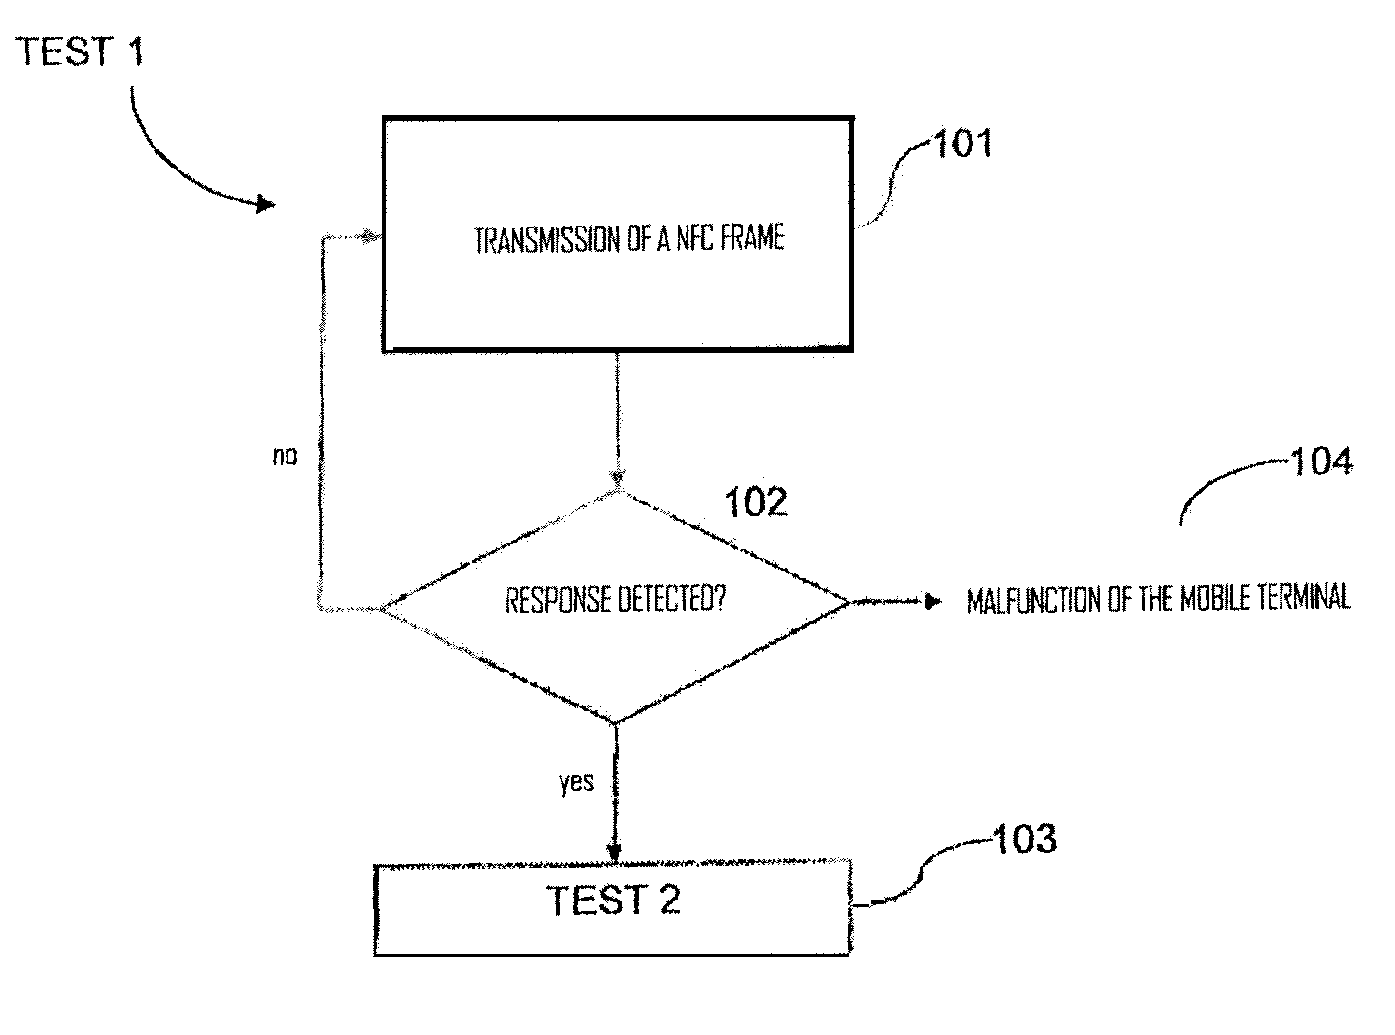 Method for the diagnostic testing of a mobile telephone terminal including contactless applications